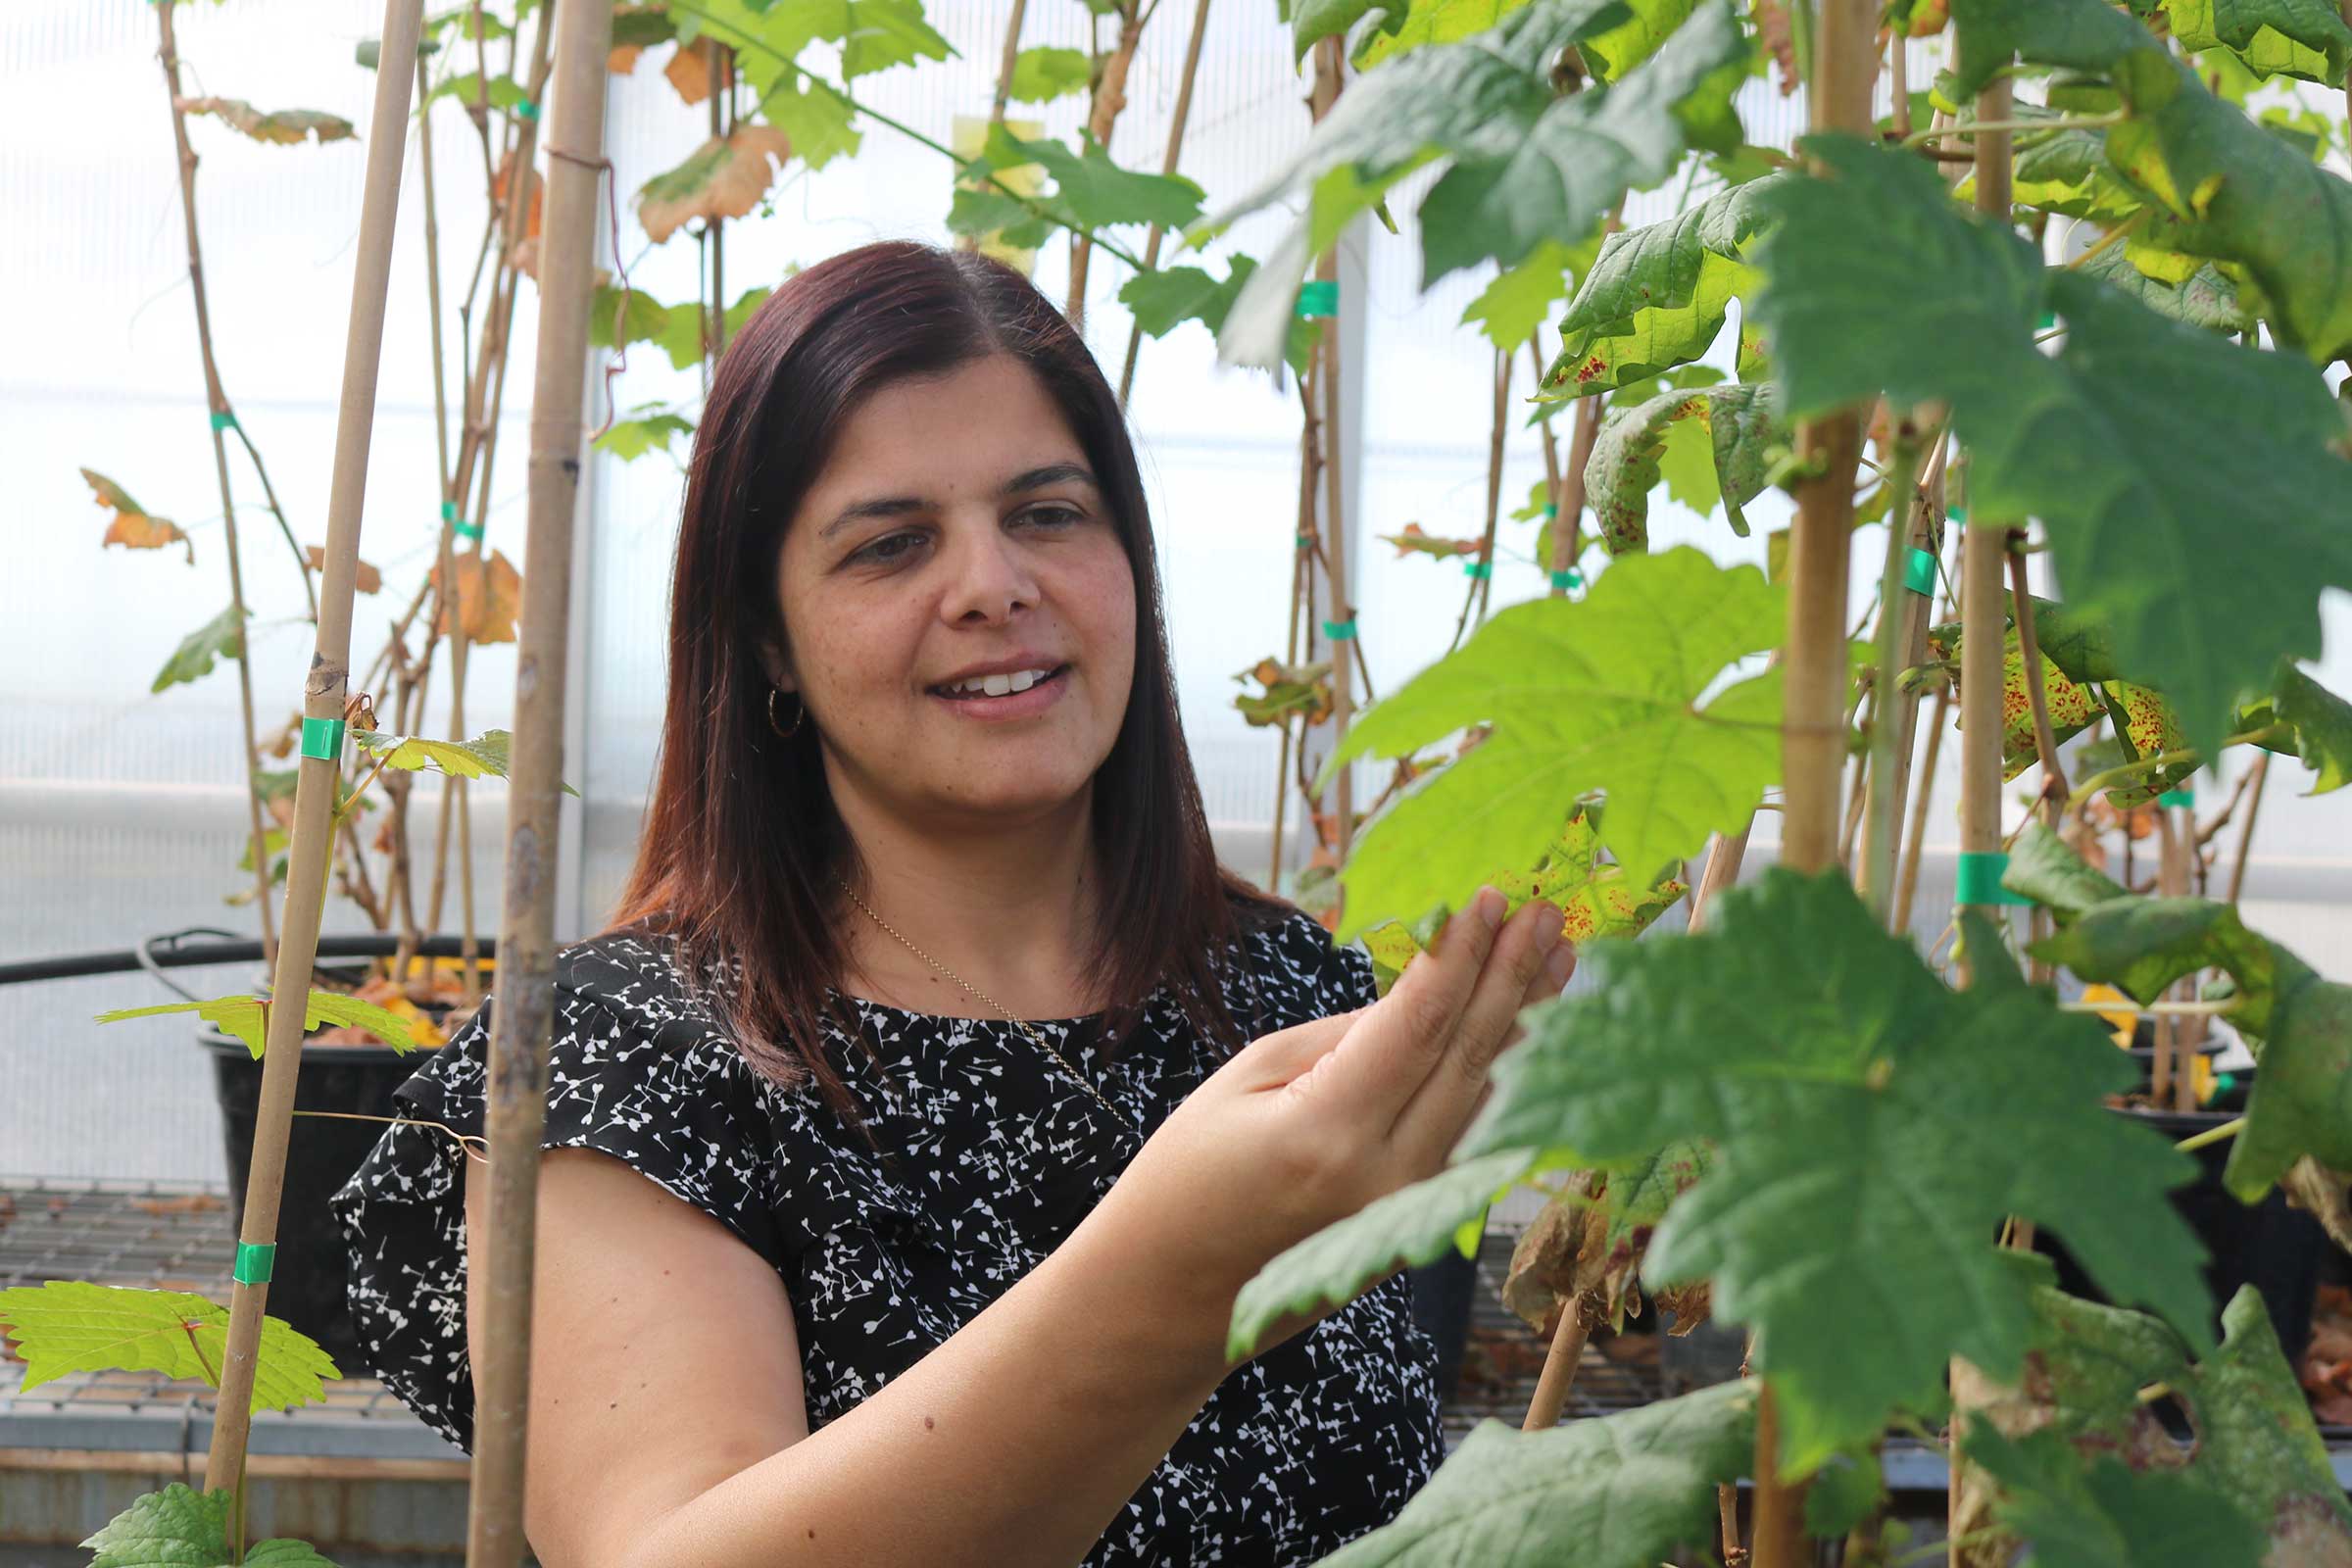 Woman among plants conducting wine industry research